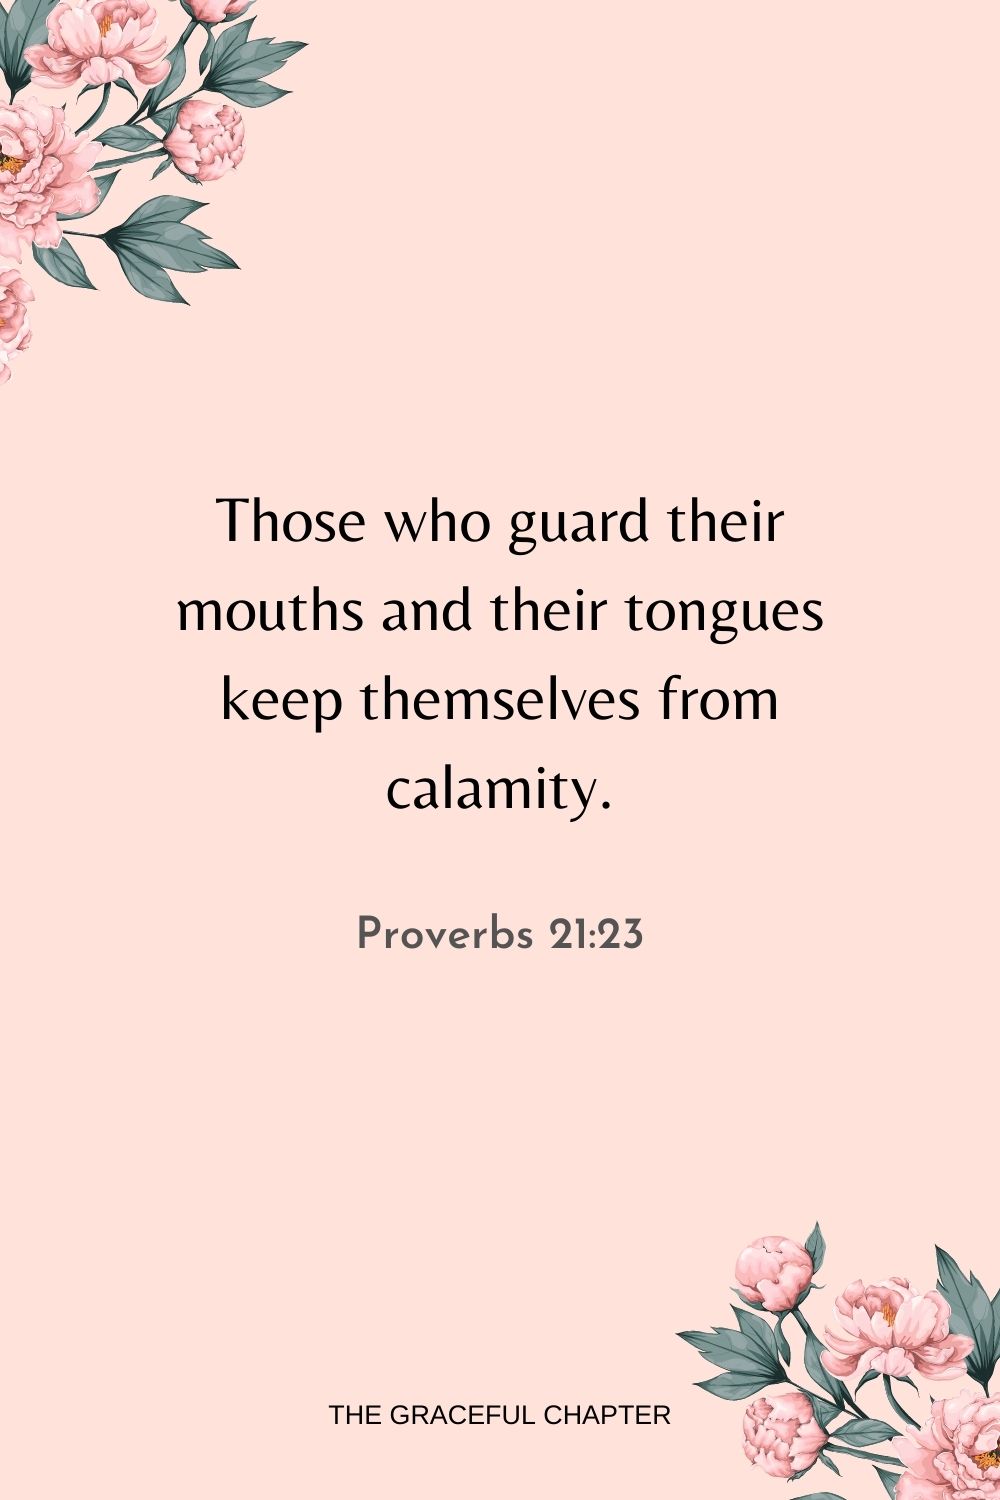 Those who guard their mouths and their tongues keep themselves from calamity. Proverbs 21:23